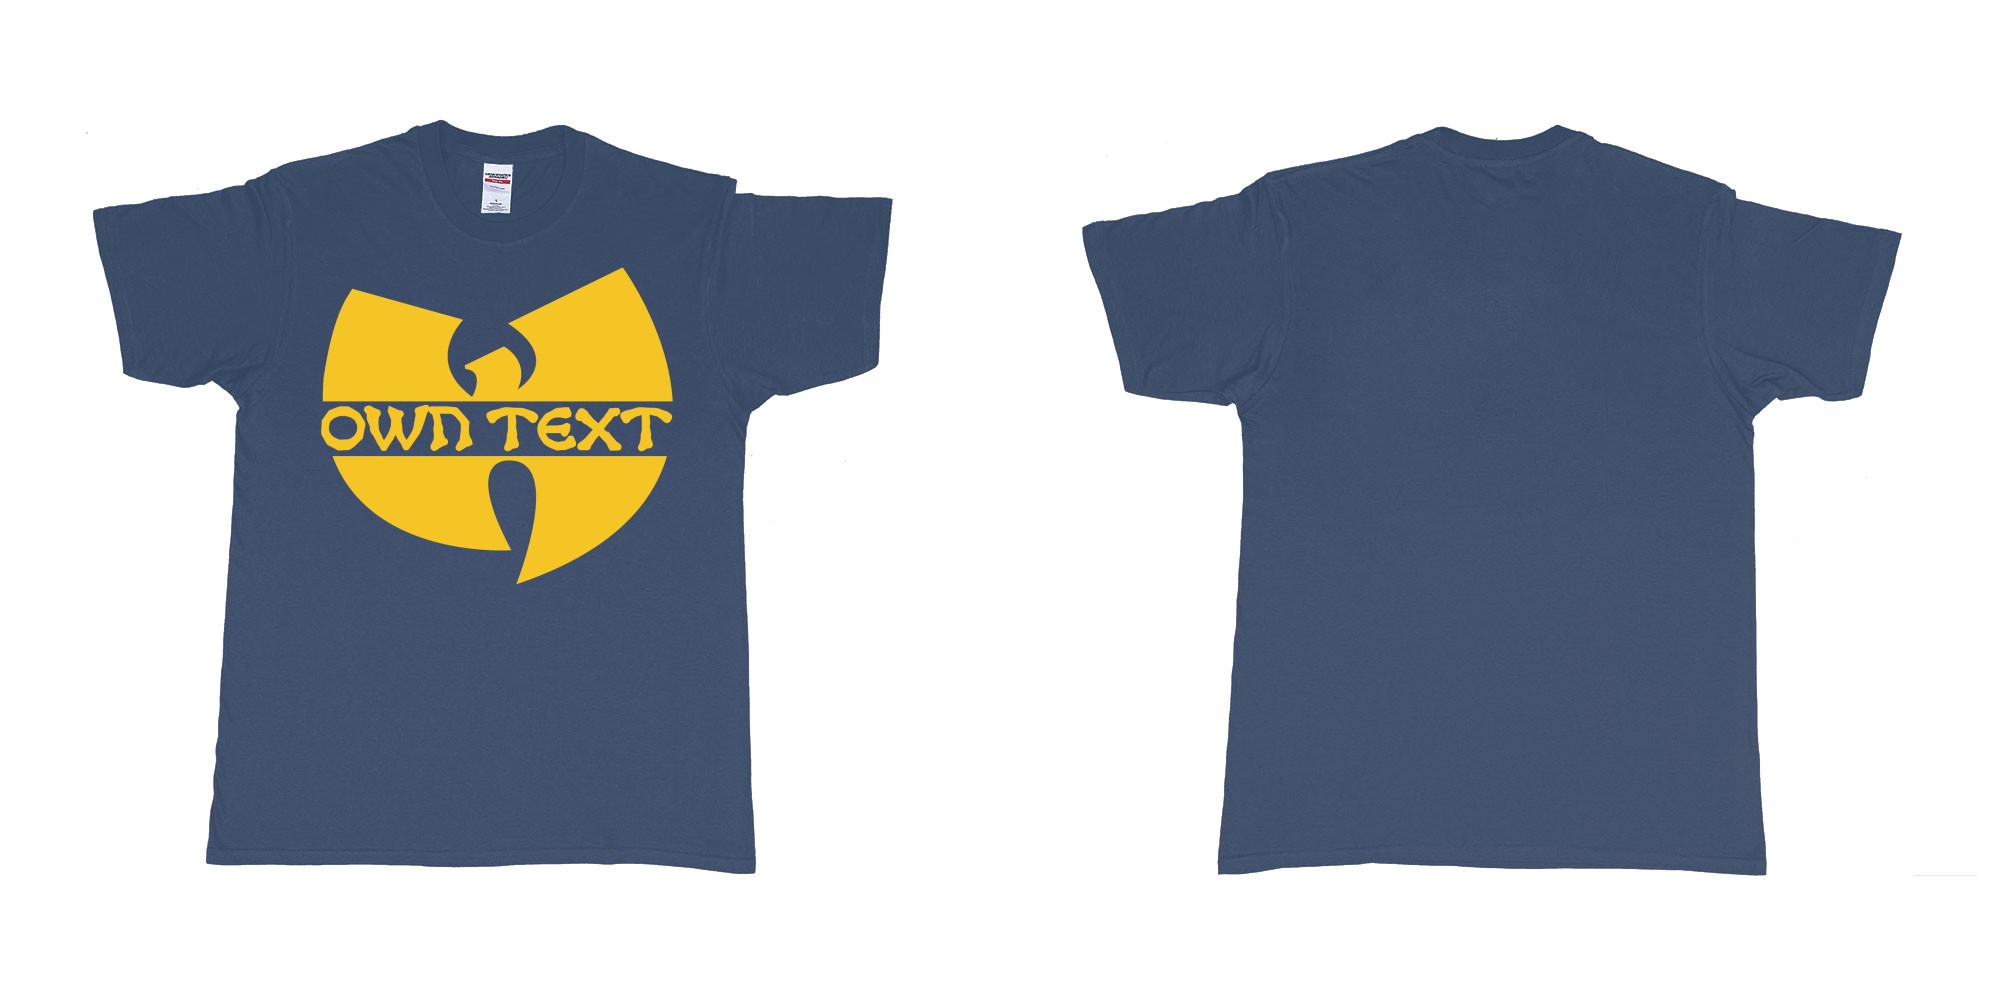 Custom tshirt design wu tang clan logo in fabric color navy choice your own text made in Bali by The Pirate Way